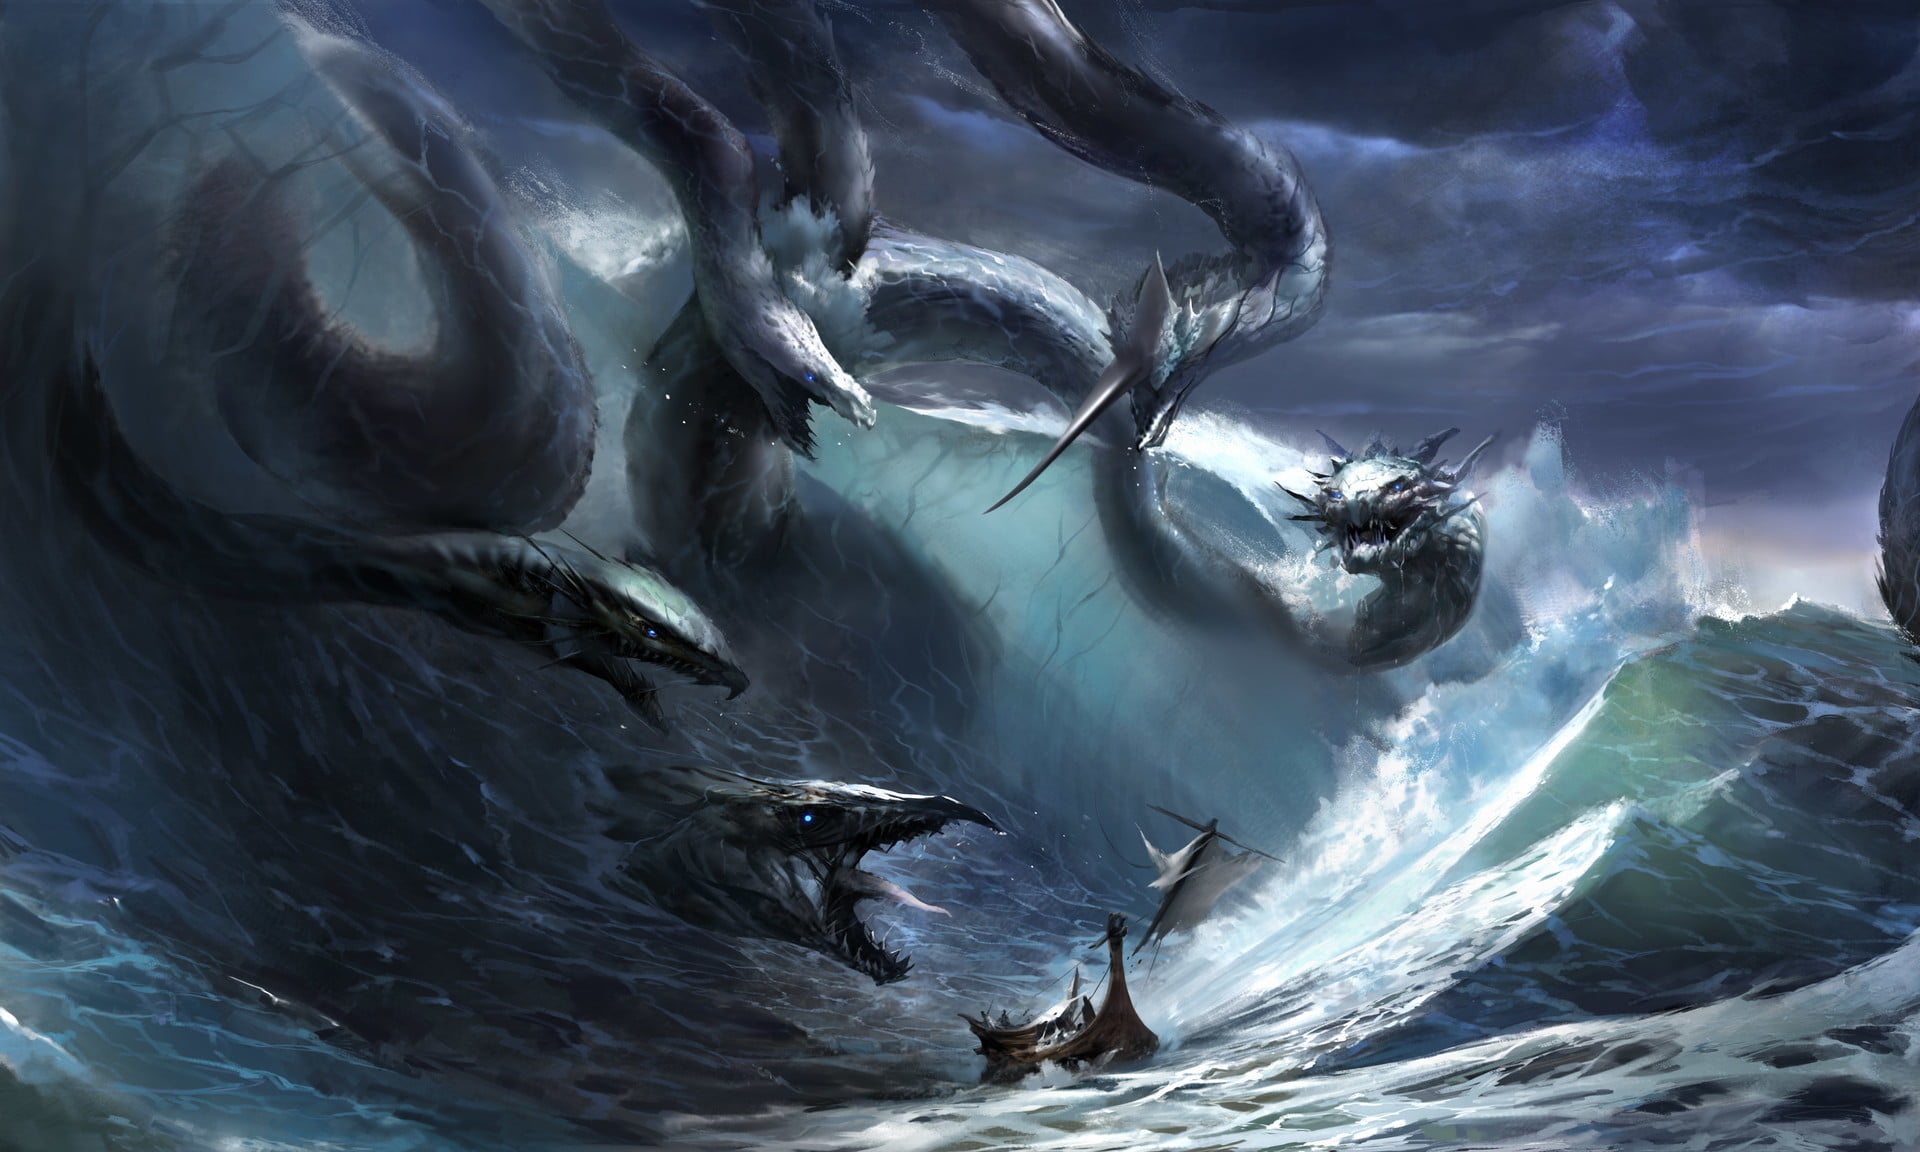 wave, storm, fantasy, the ocean, danger, ship, the situation